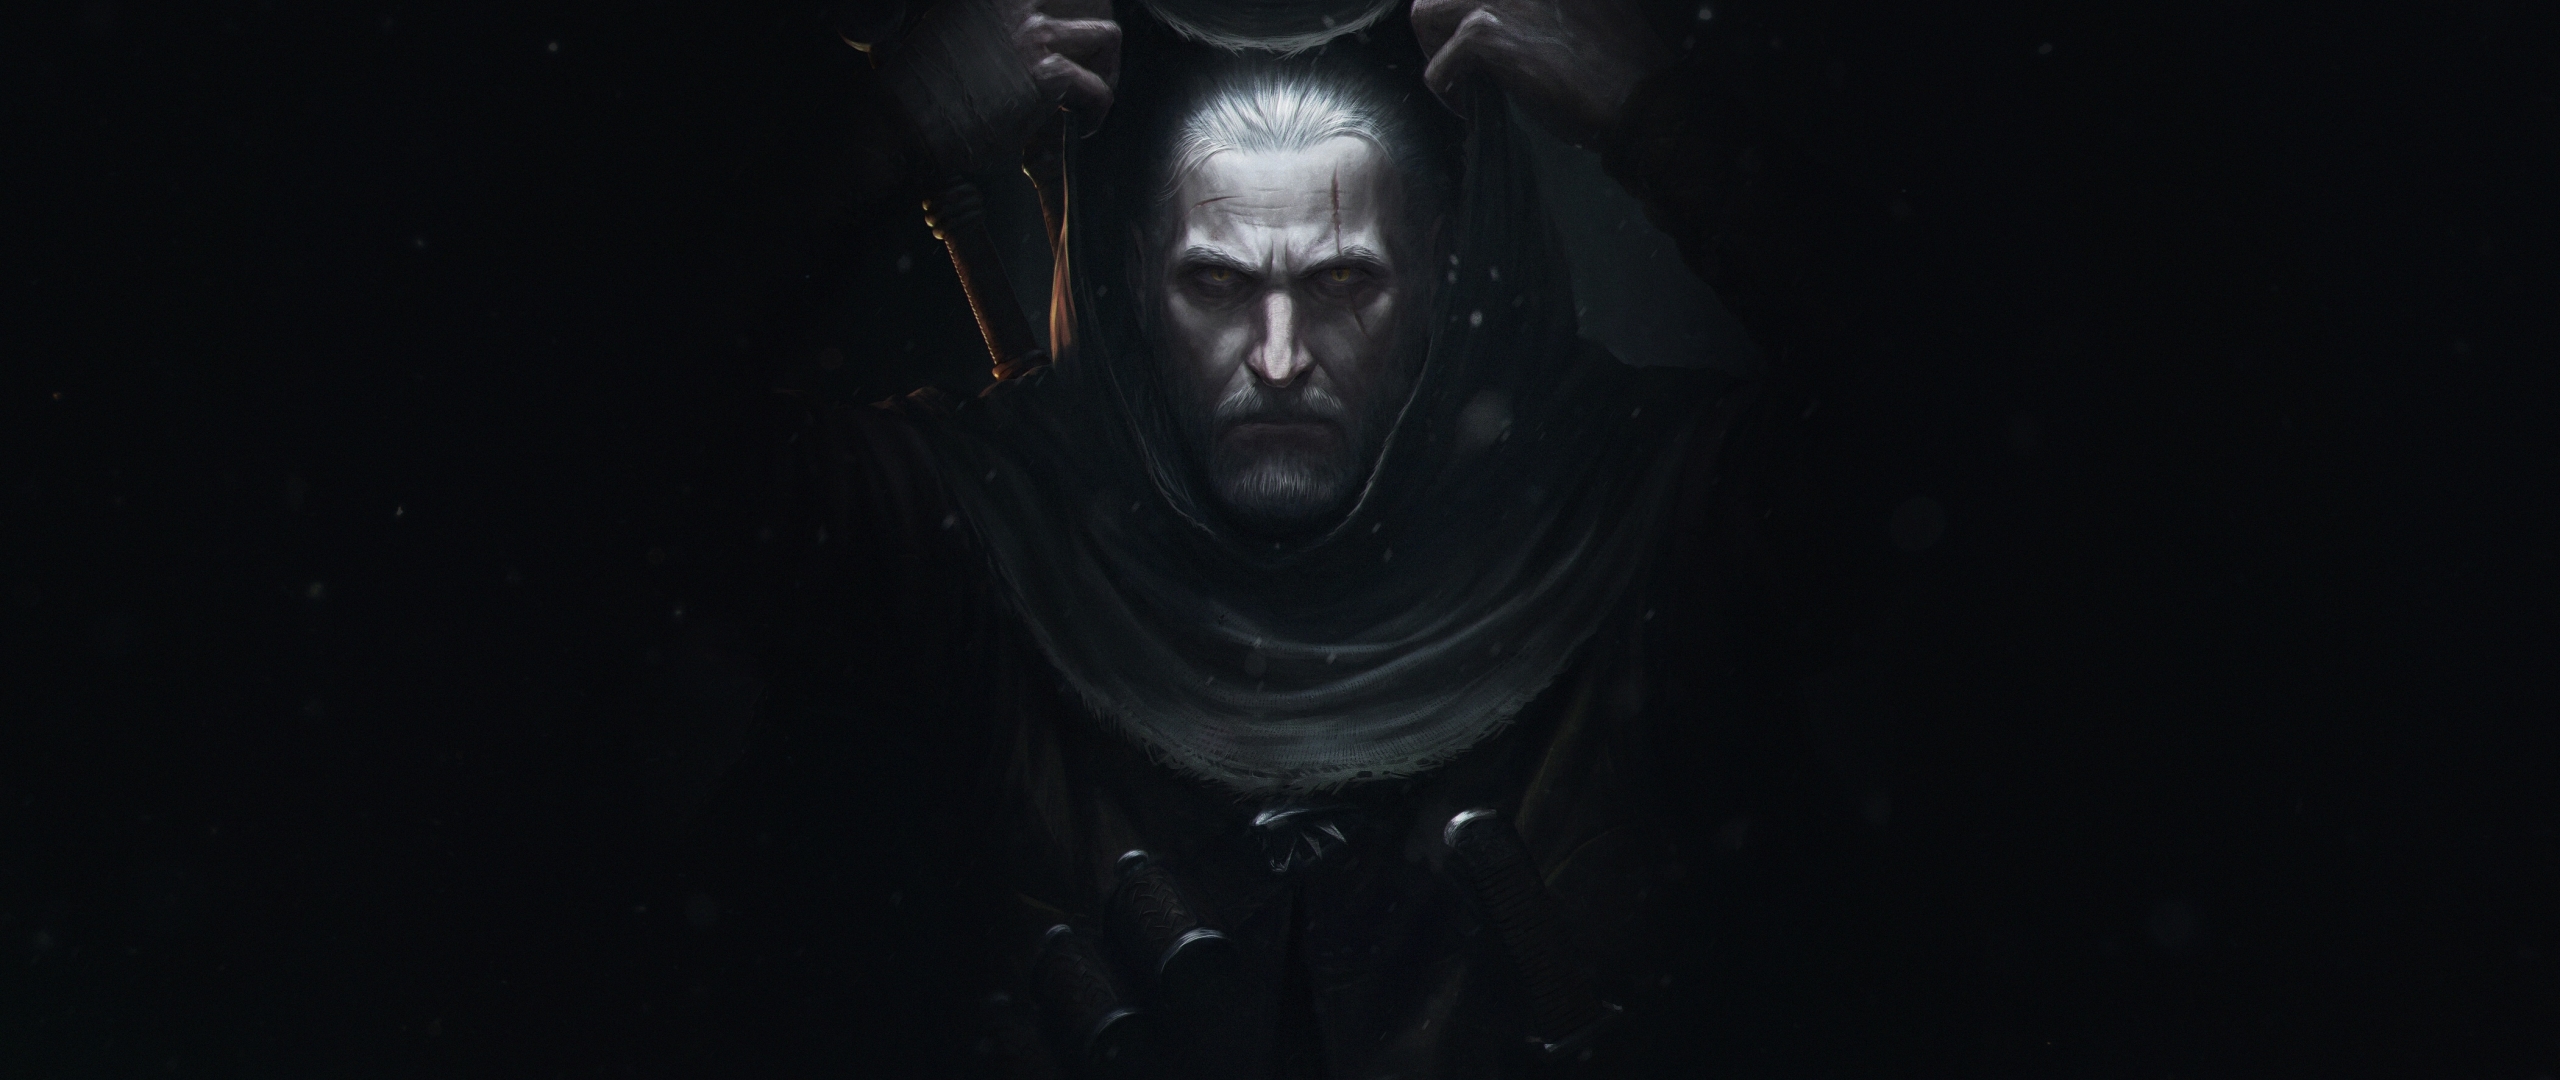 2560x1080 Resolution The Witcher 3 Wild Hunt Poster 2560x1080